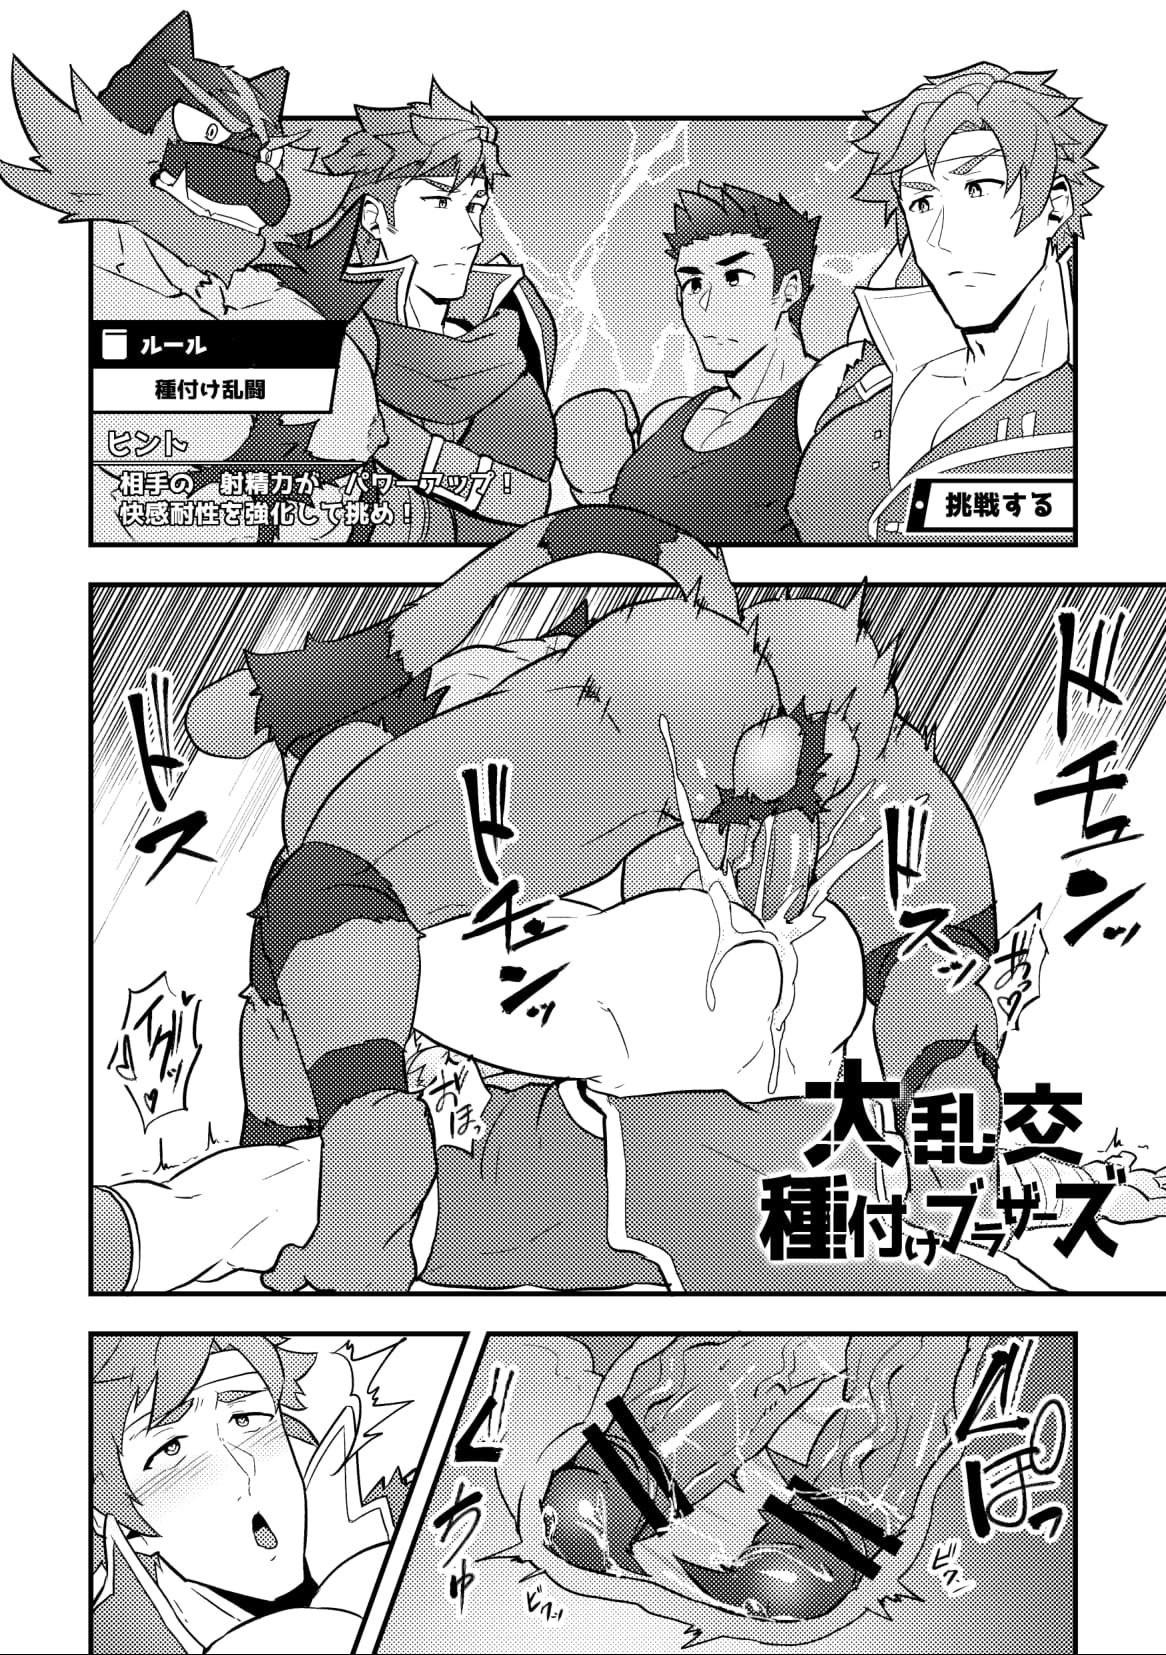 Pussy Play Onabe Hon C95 - The idolmaster Fate grand order Granblue fantasy Pokemon Fire emblem Castlevania Dragalia lost Punch-out Roleplay - Page 14